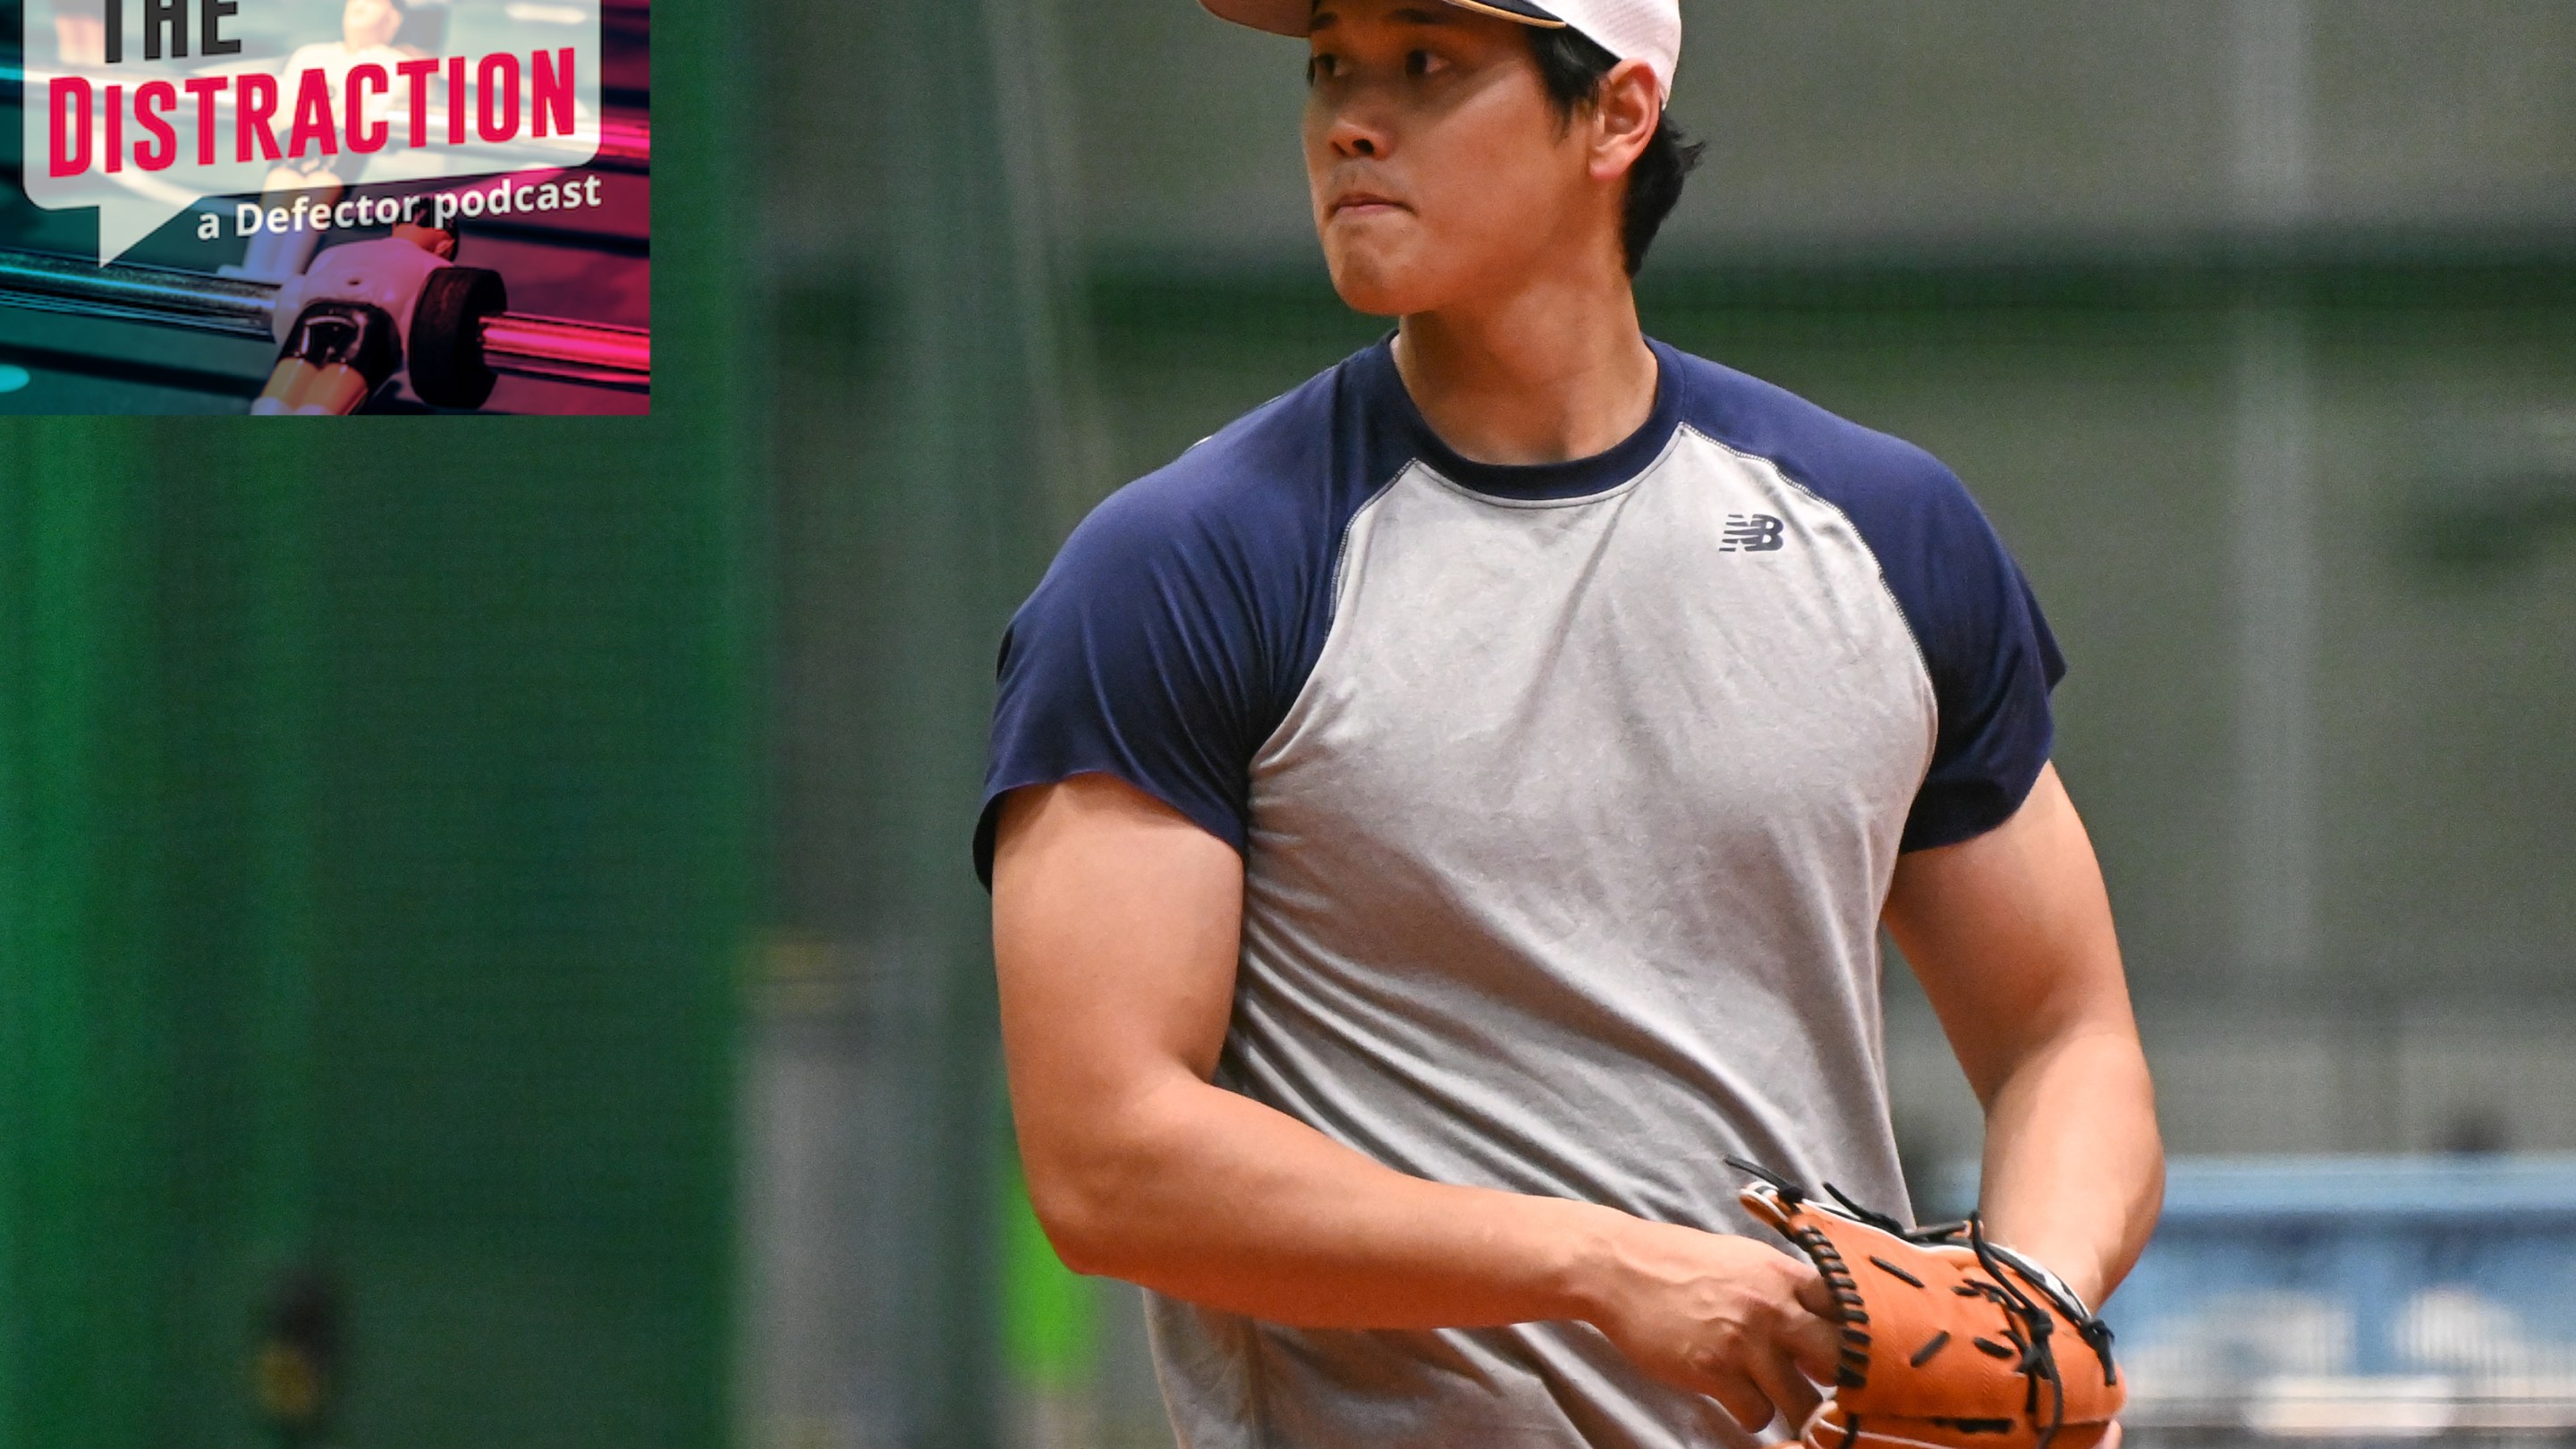 Shohei Ohtani looking swole as hell during Samurai Japan's training before the 2023 World Baseball Classic, with The Distraction logo at upper left.